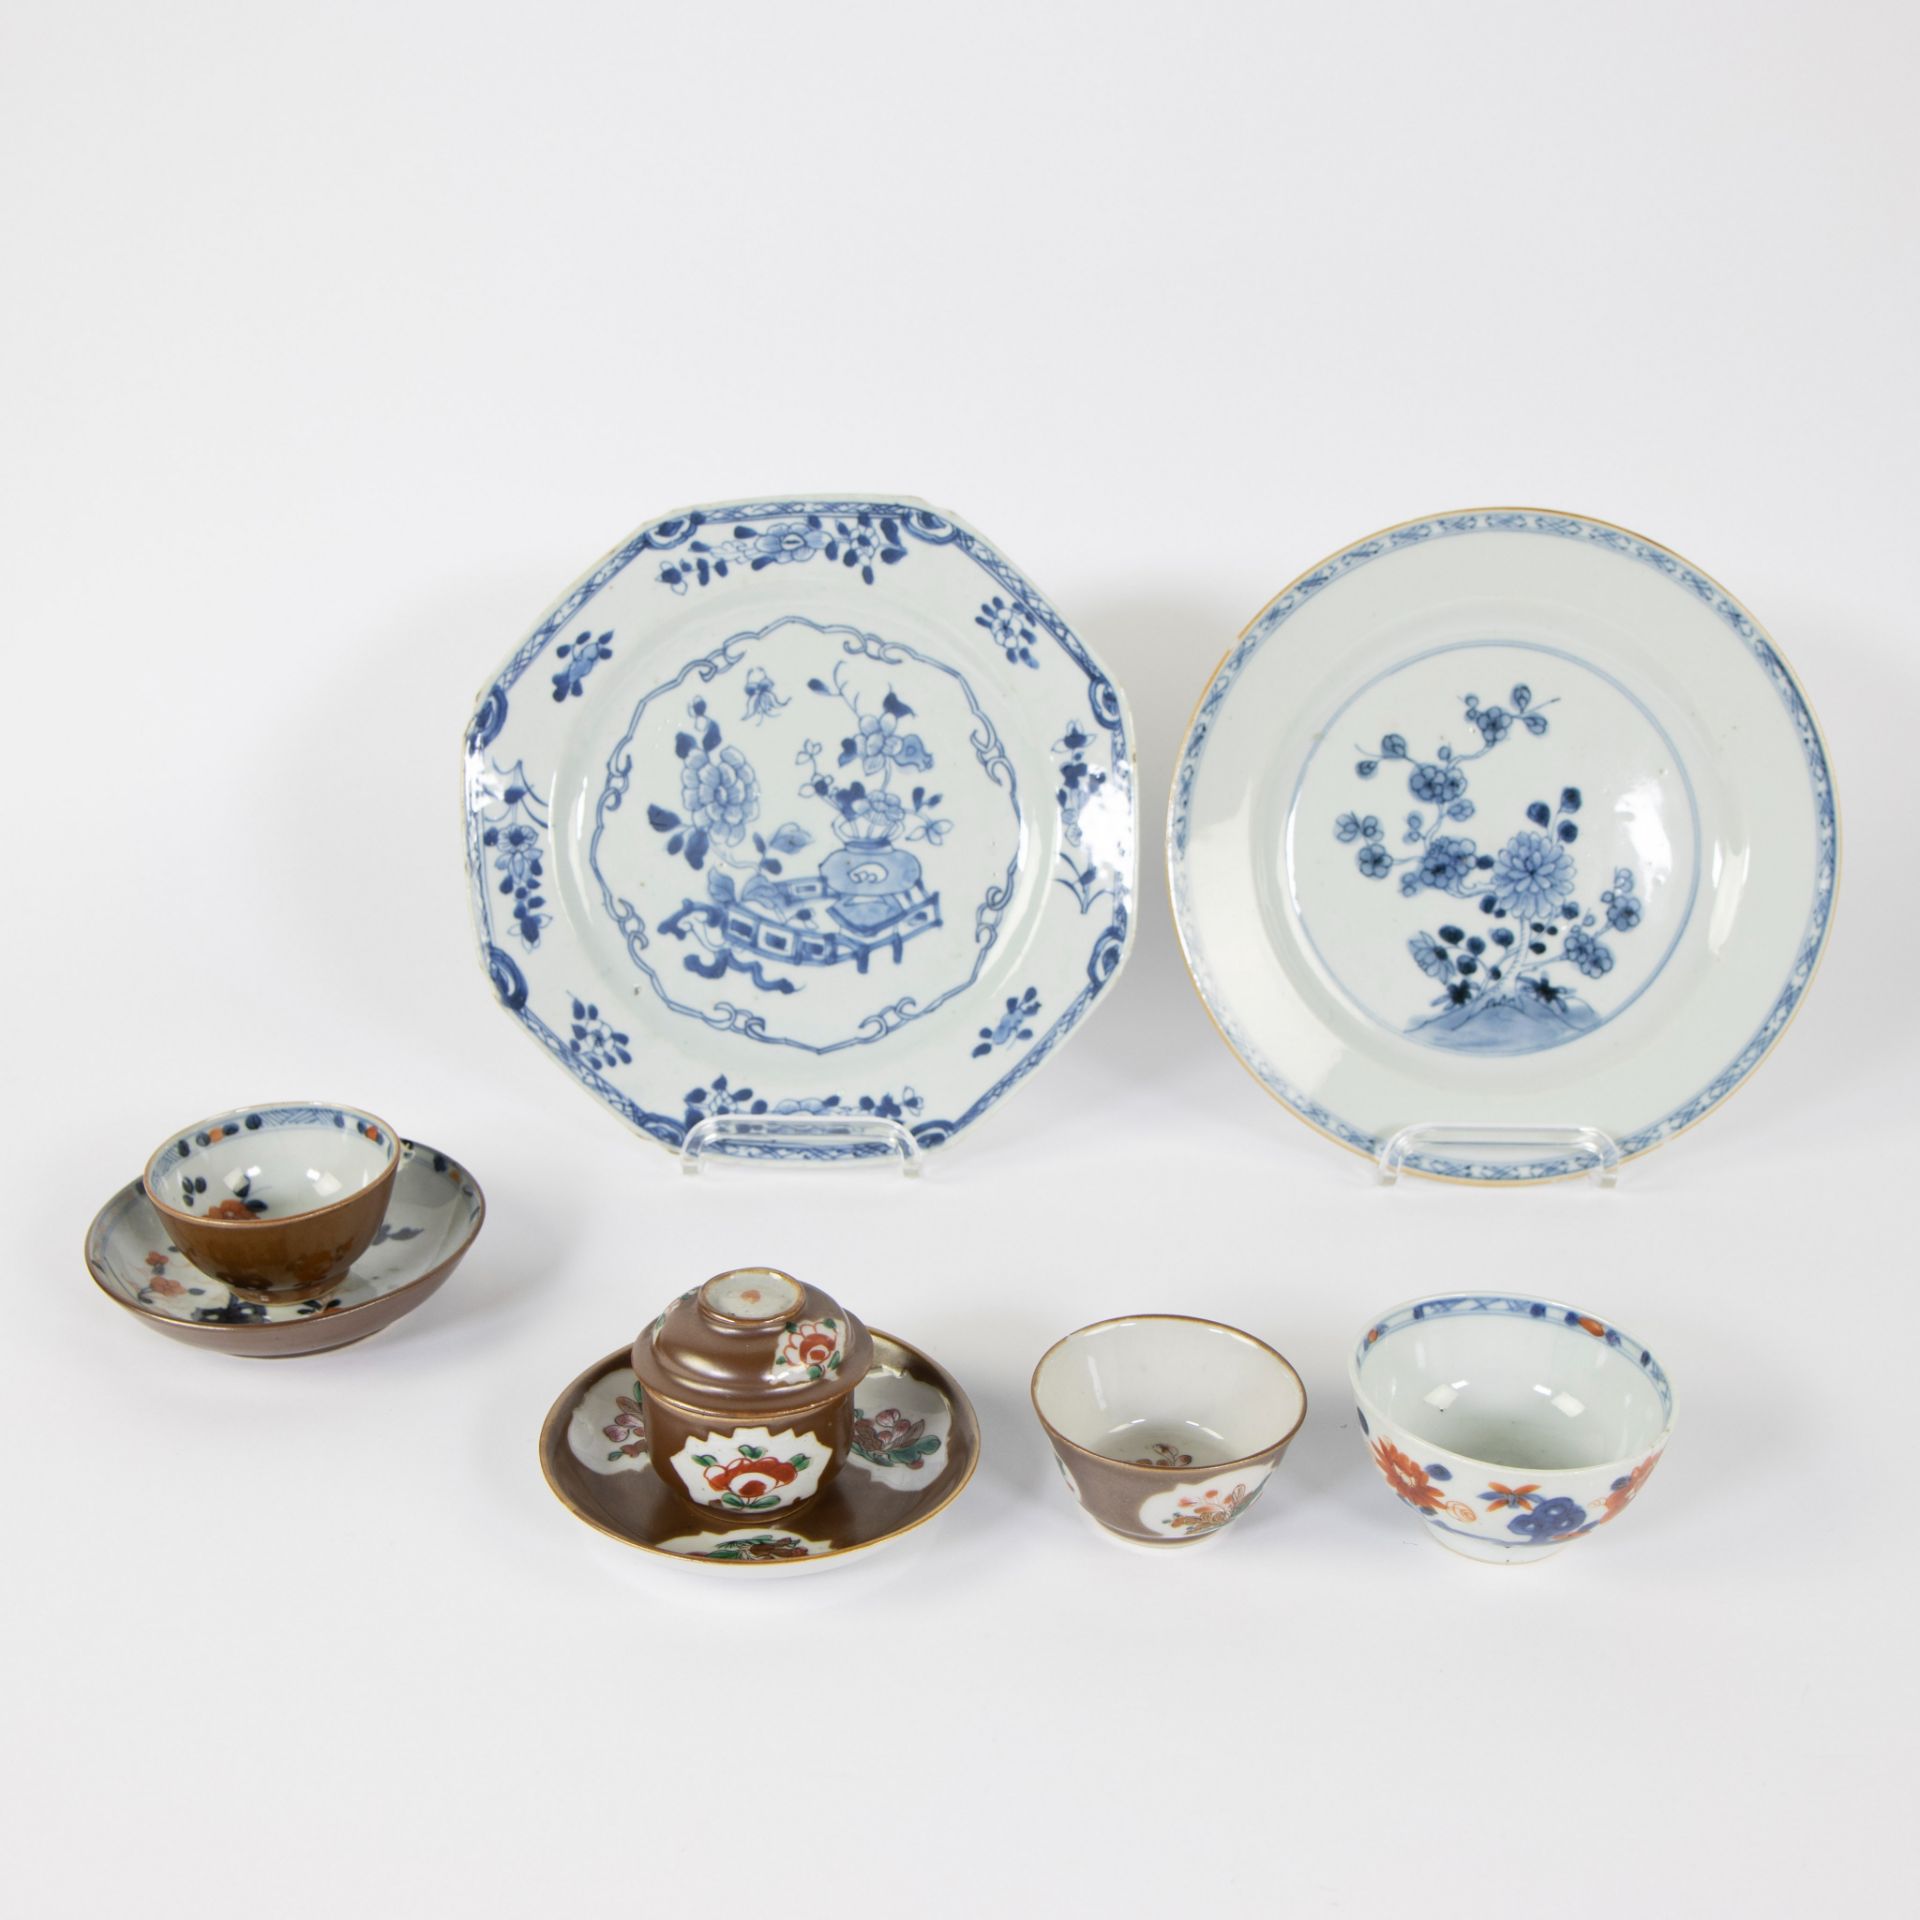 A set of Chinese batavia brown cups and saucers, one Imari cup and 2 plates blue/white, 18th C.